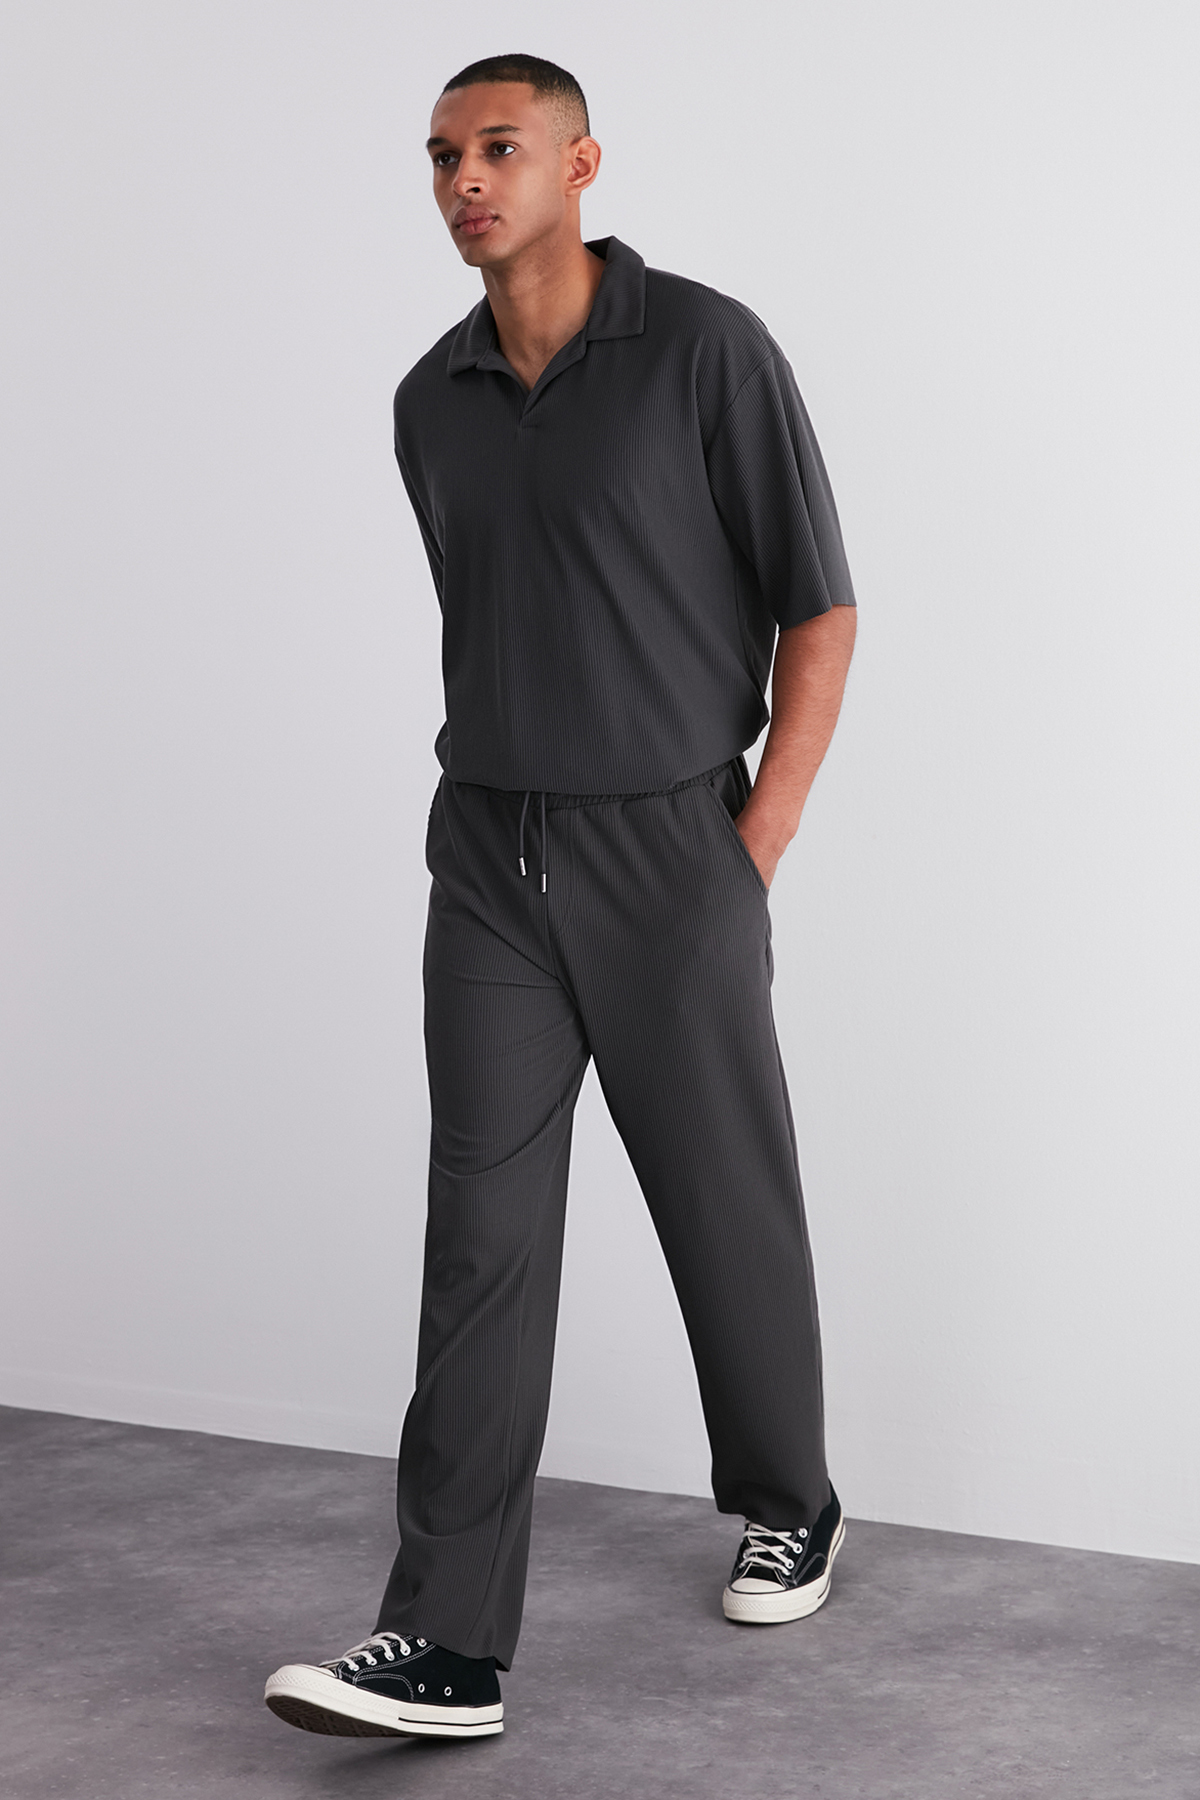 Trendyol Limited Edition Smoked Comfort/Wide Leg Textured Hidden Lacing Wrinkle-Free Sweatpants